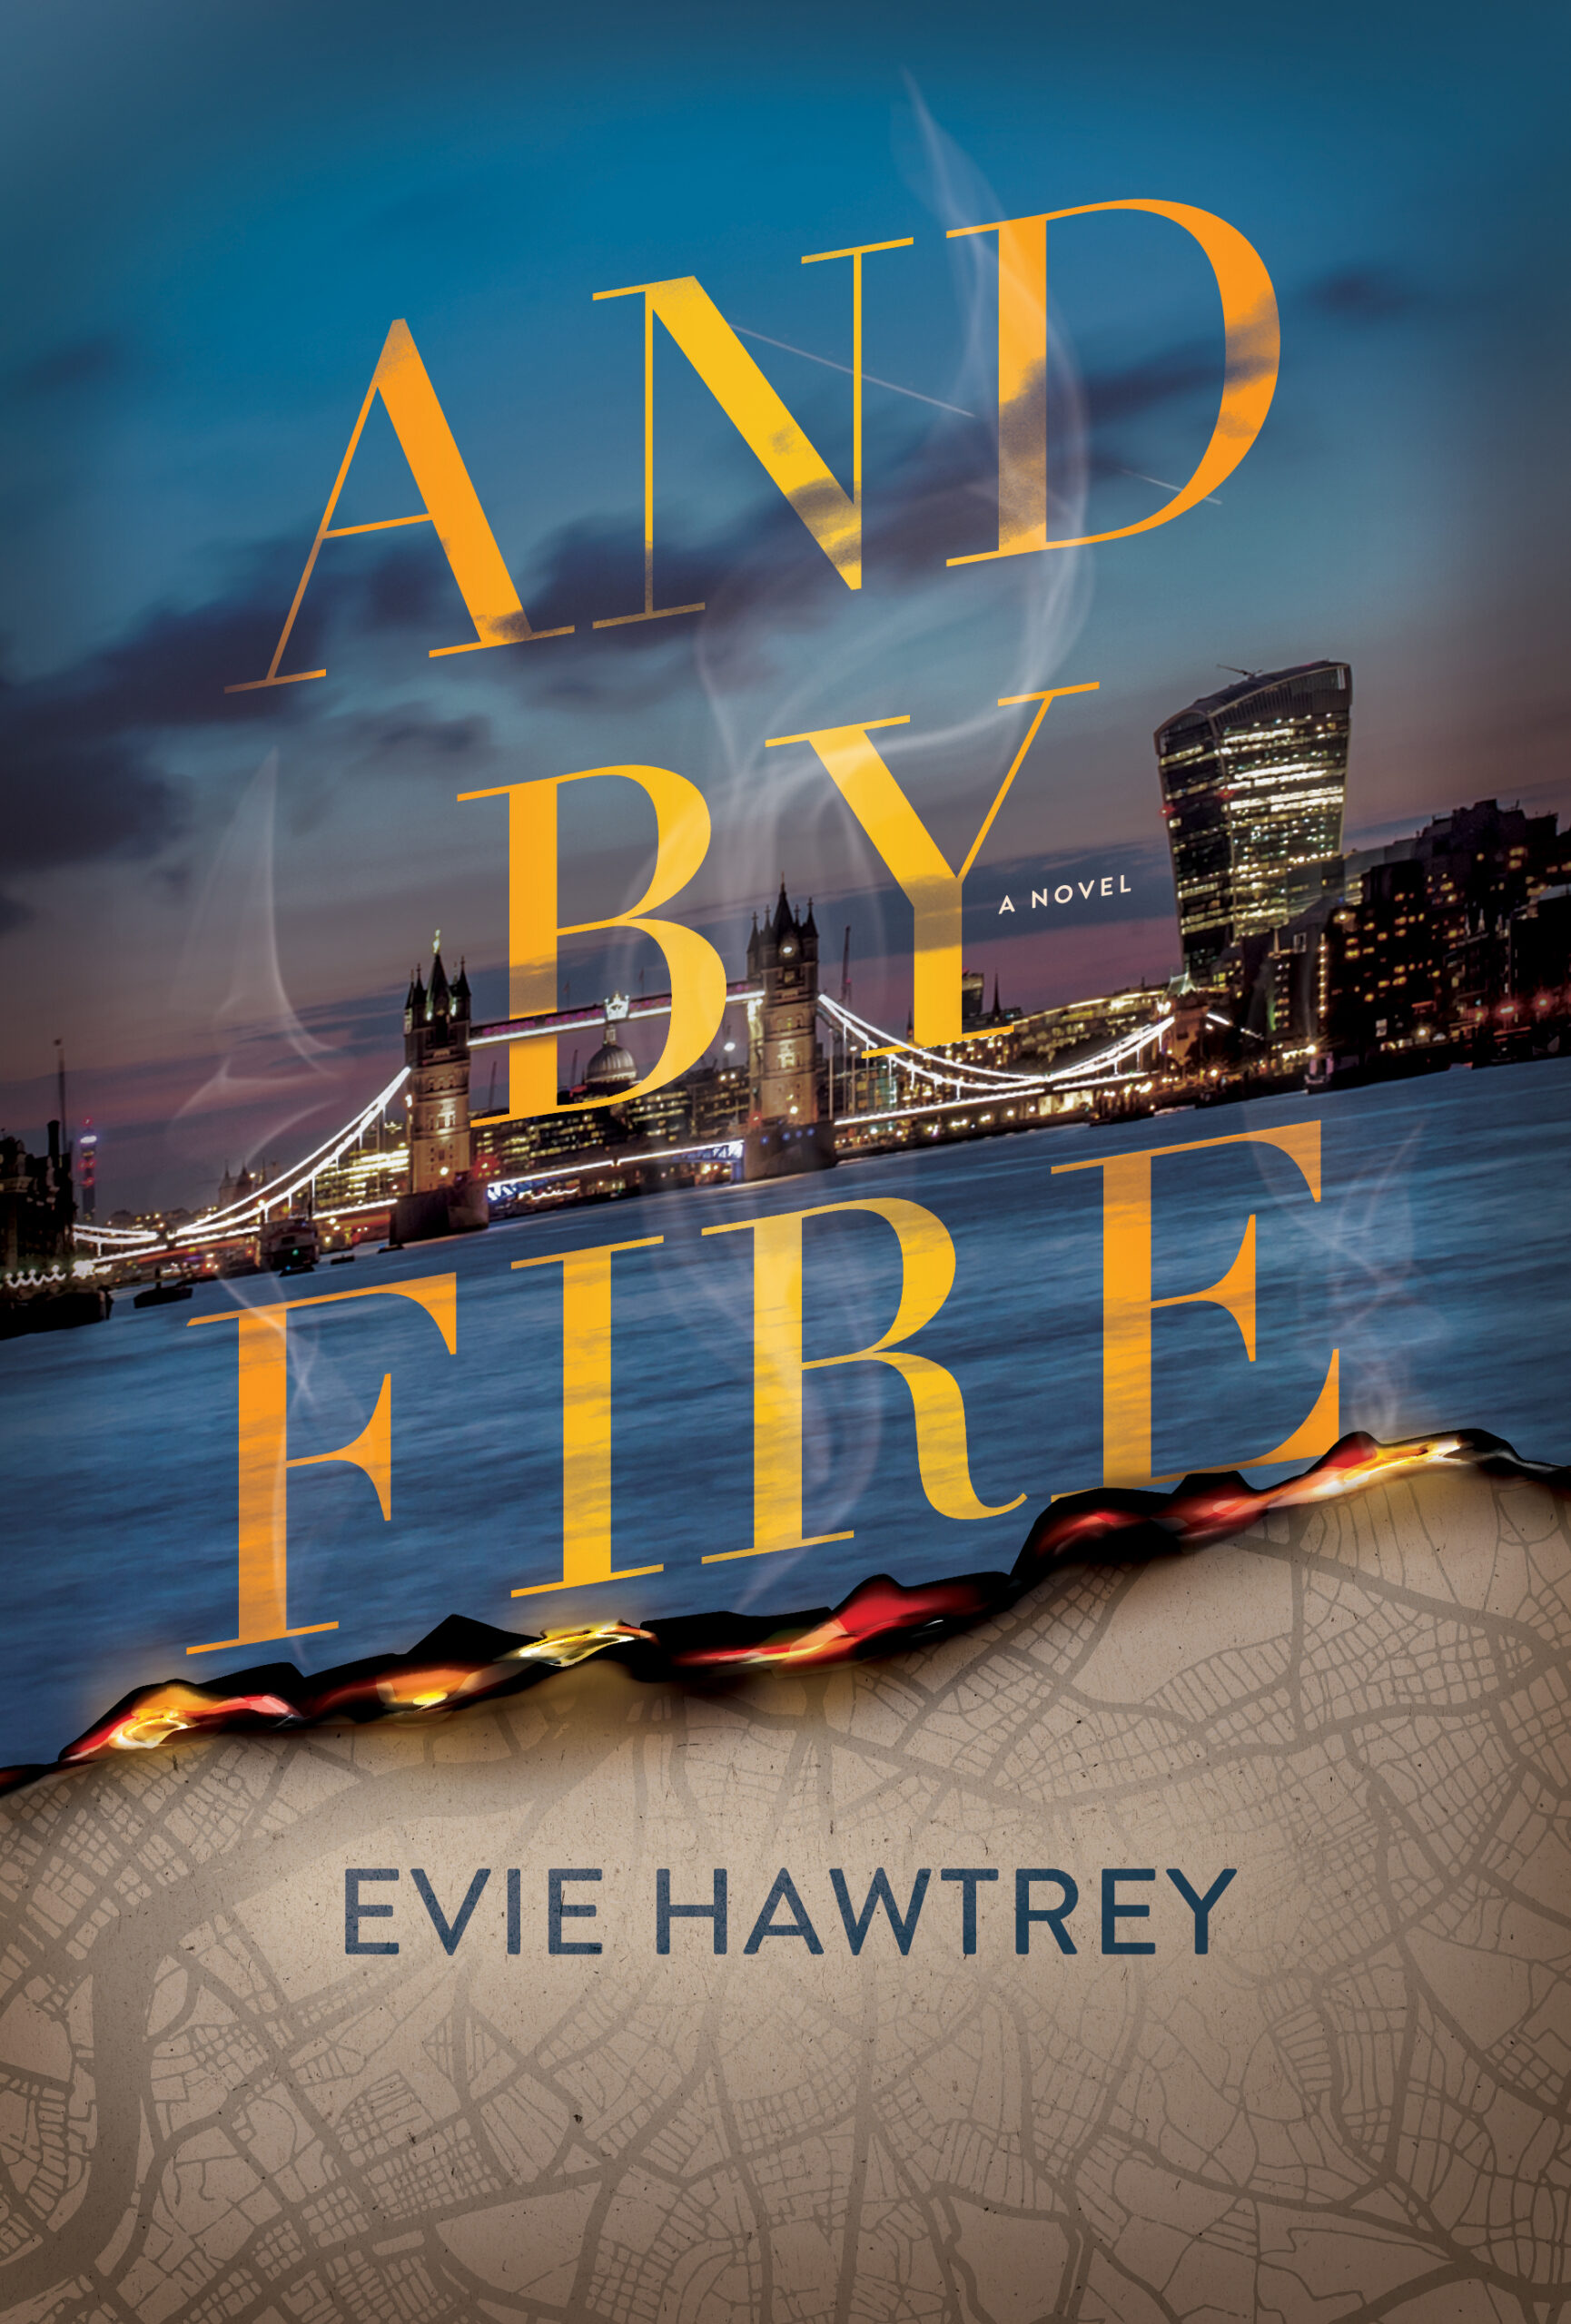 Launch: Evie Hawtrey's And By Fire - Historical Novel Society